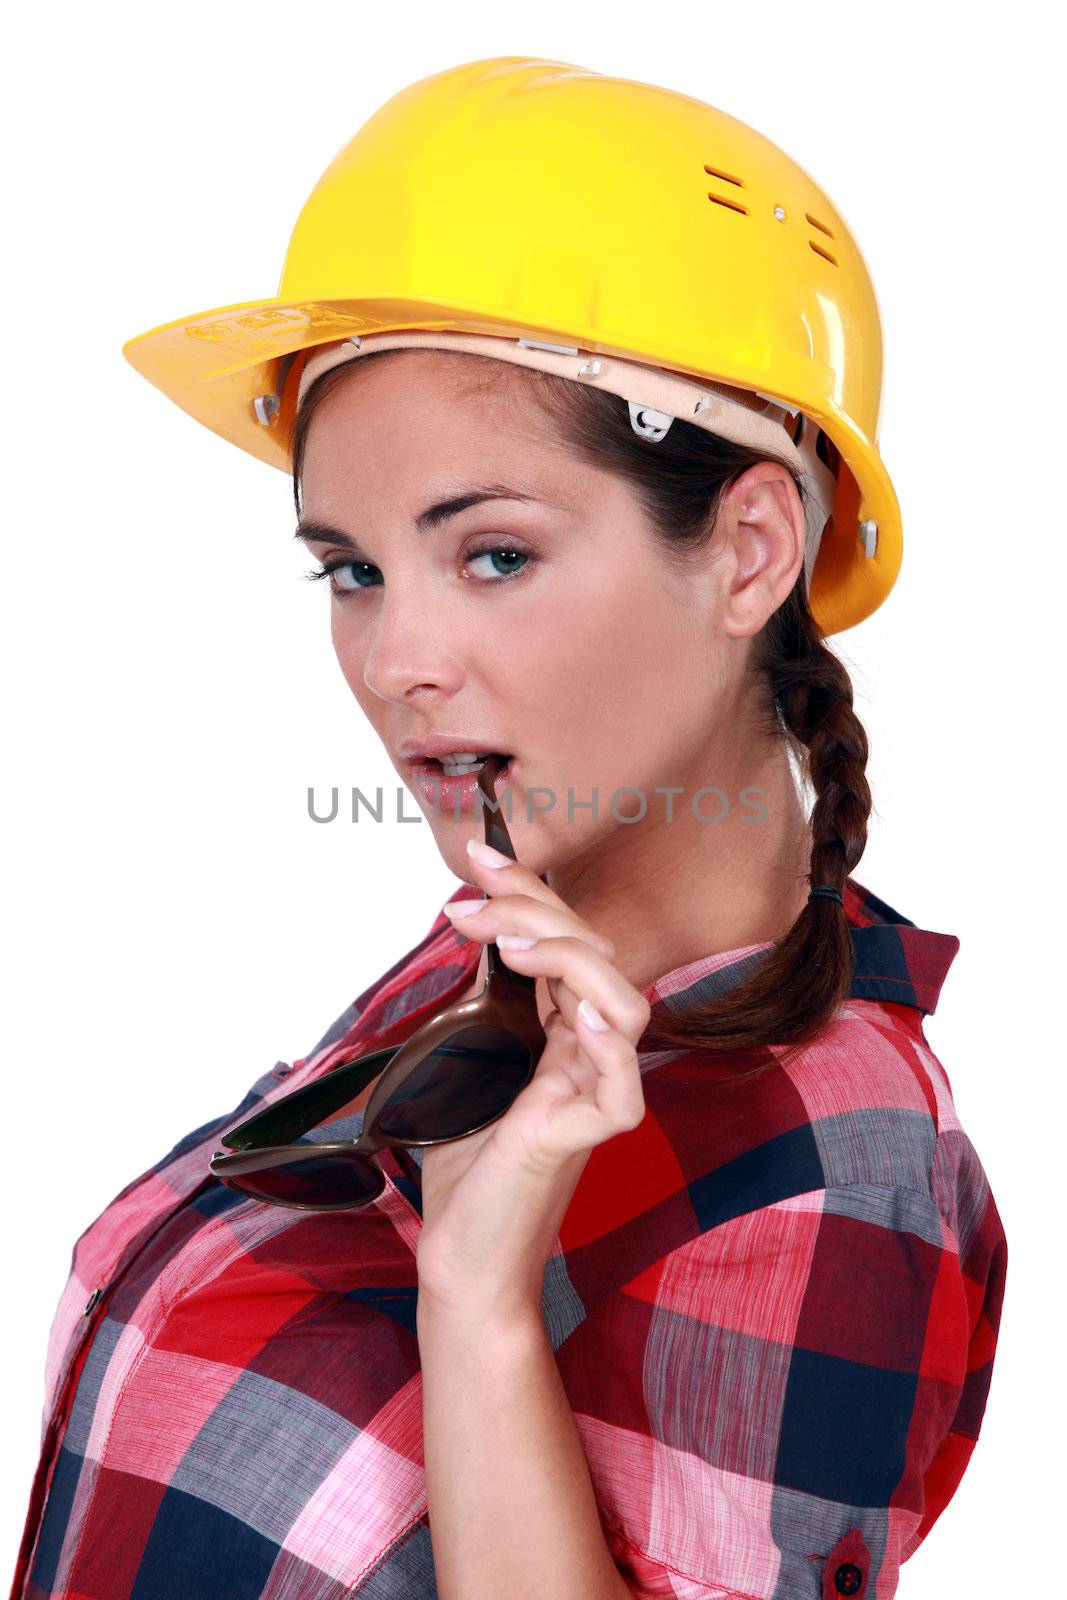 An alluring female construction worker with sunglasses. by phovoir